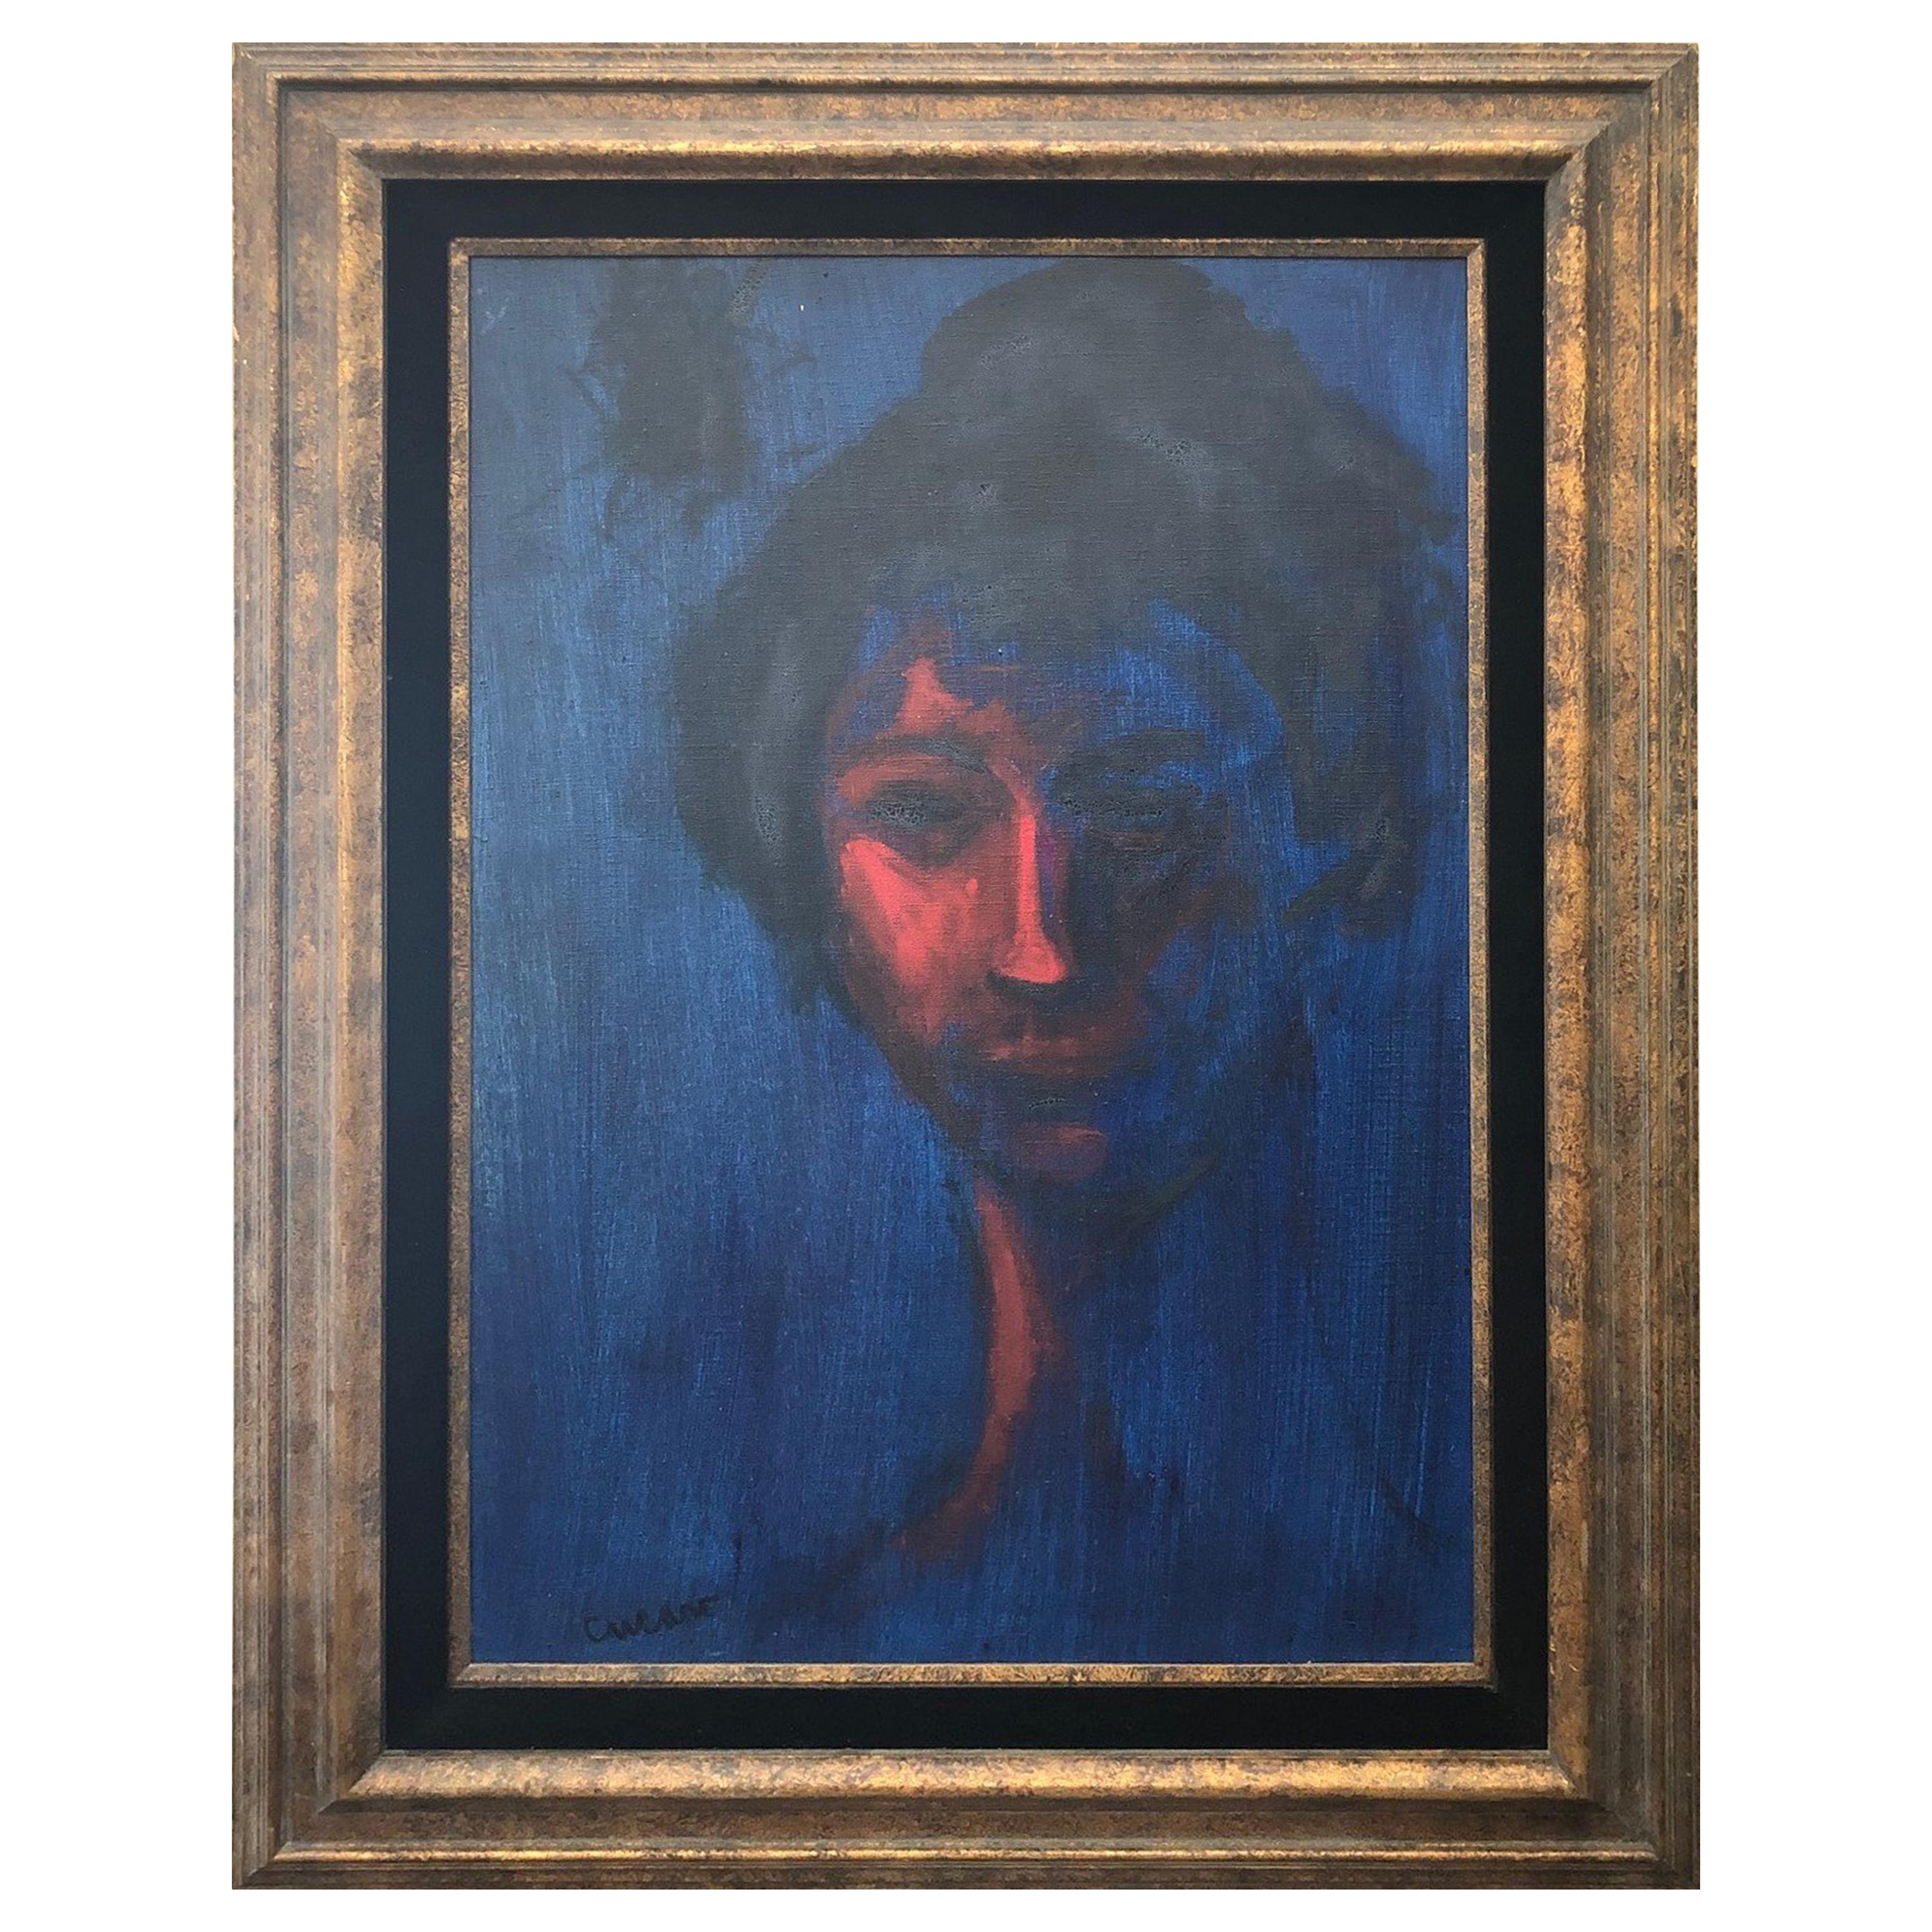 Original Oil on Canvas Portrait by Listed Artist Pascal Cucaro